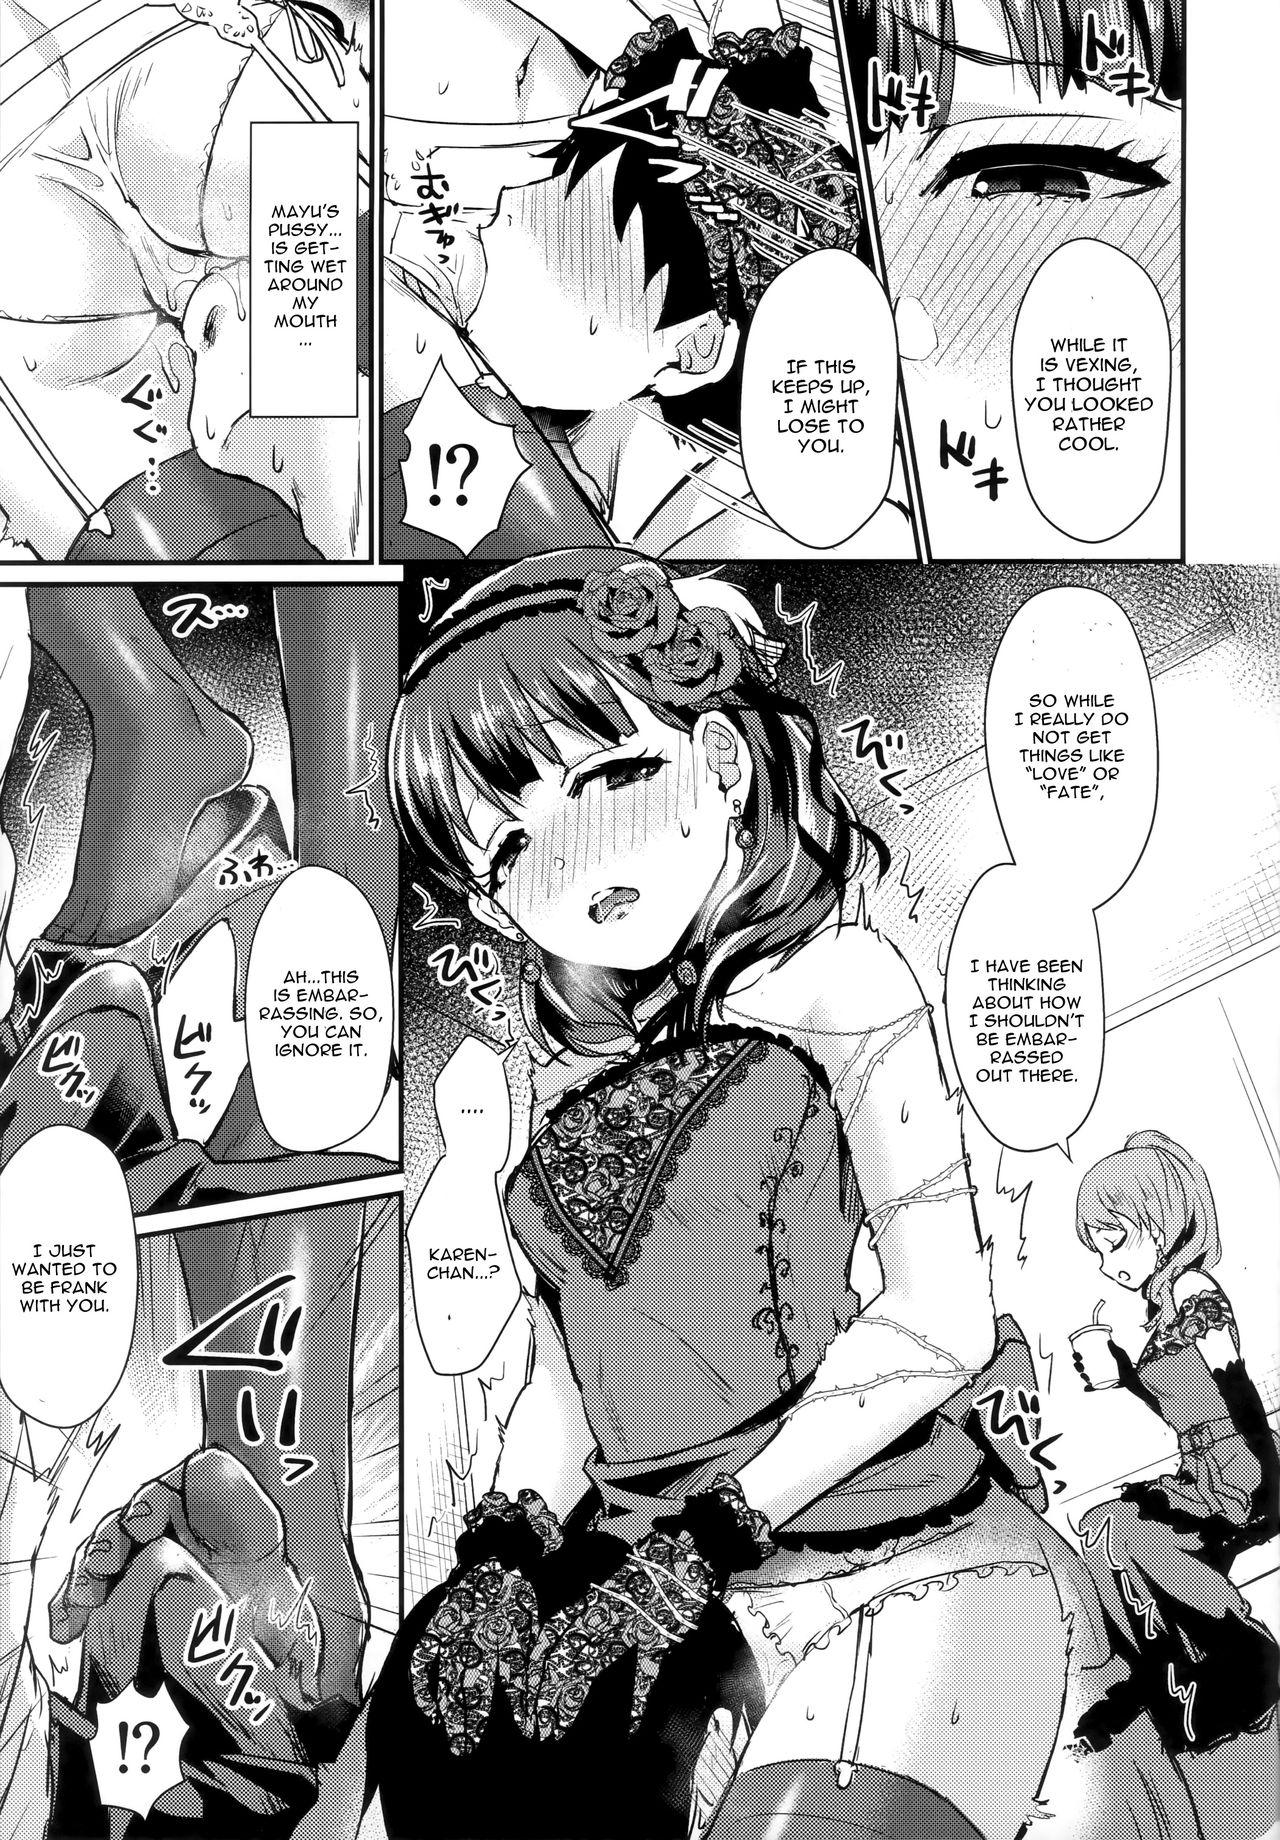 Boobs Don't stop my pure love - The idolmaster Petite Porn - Page 10